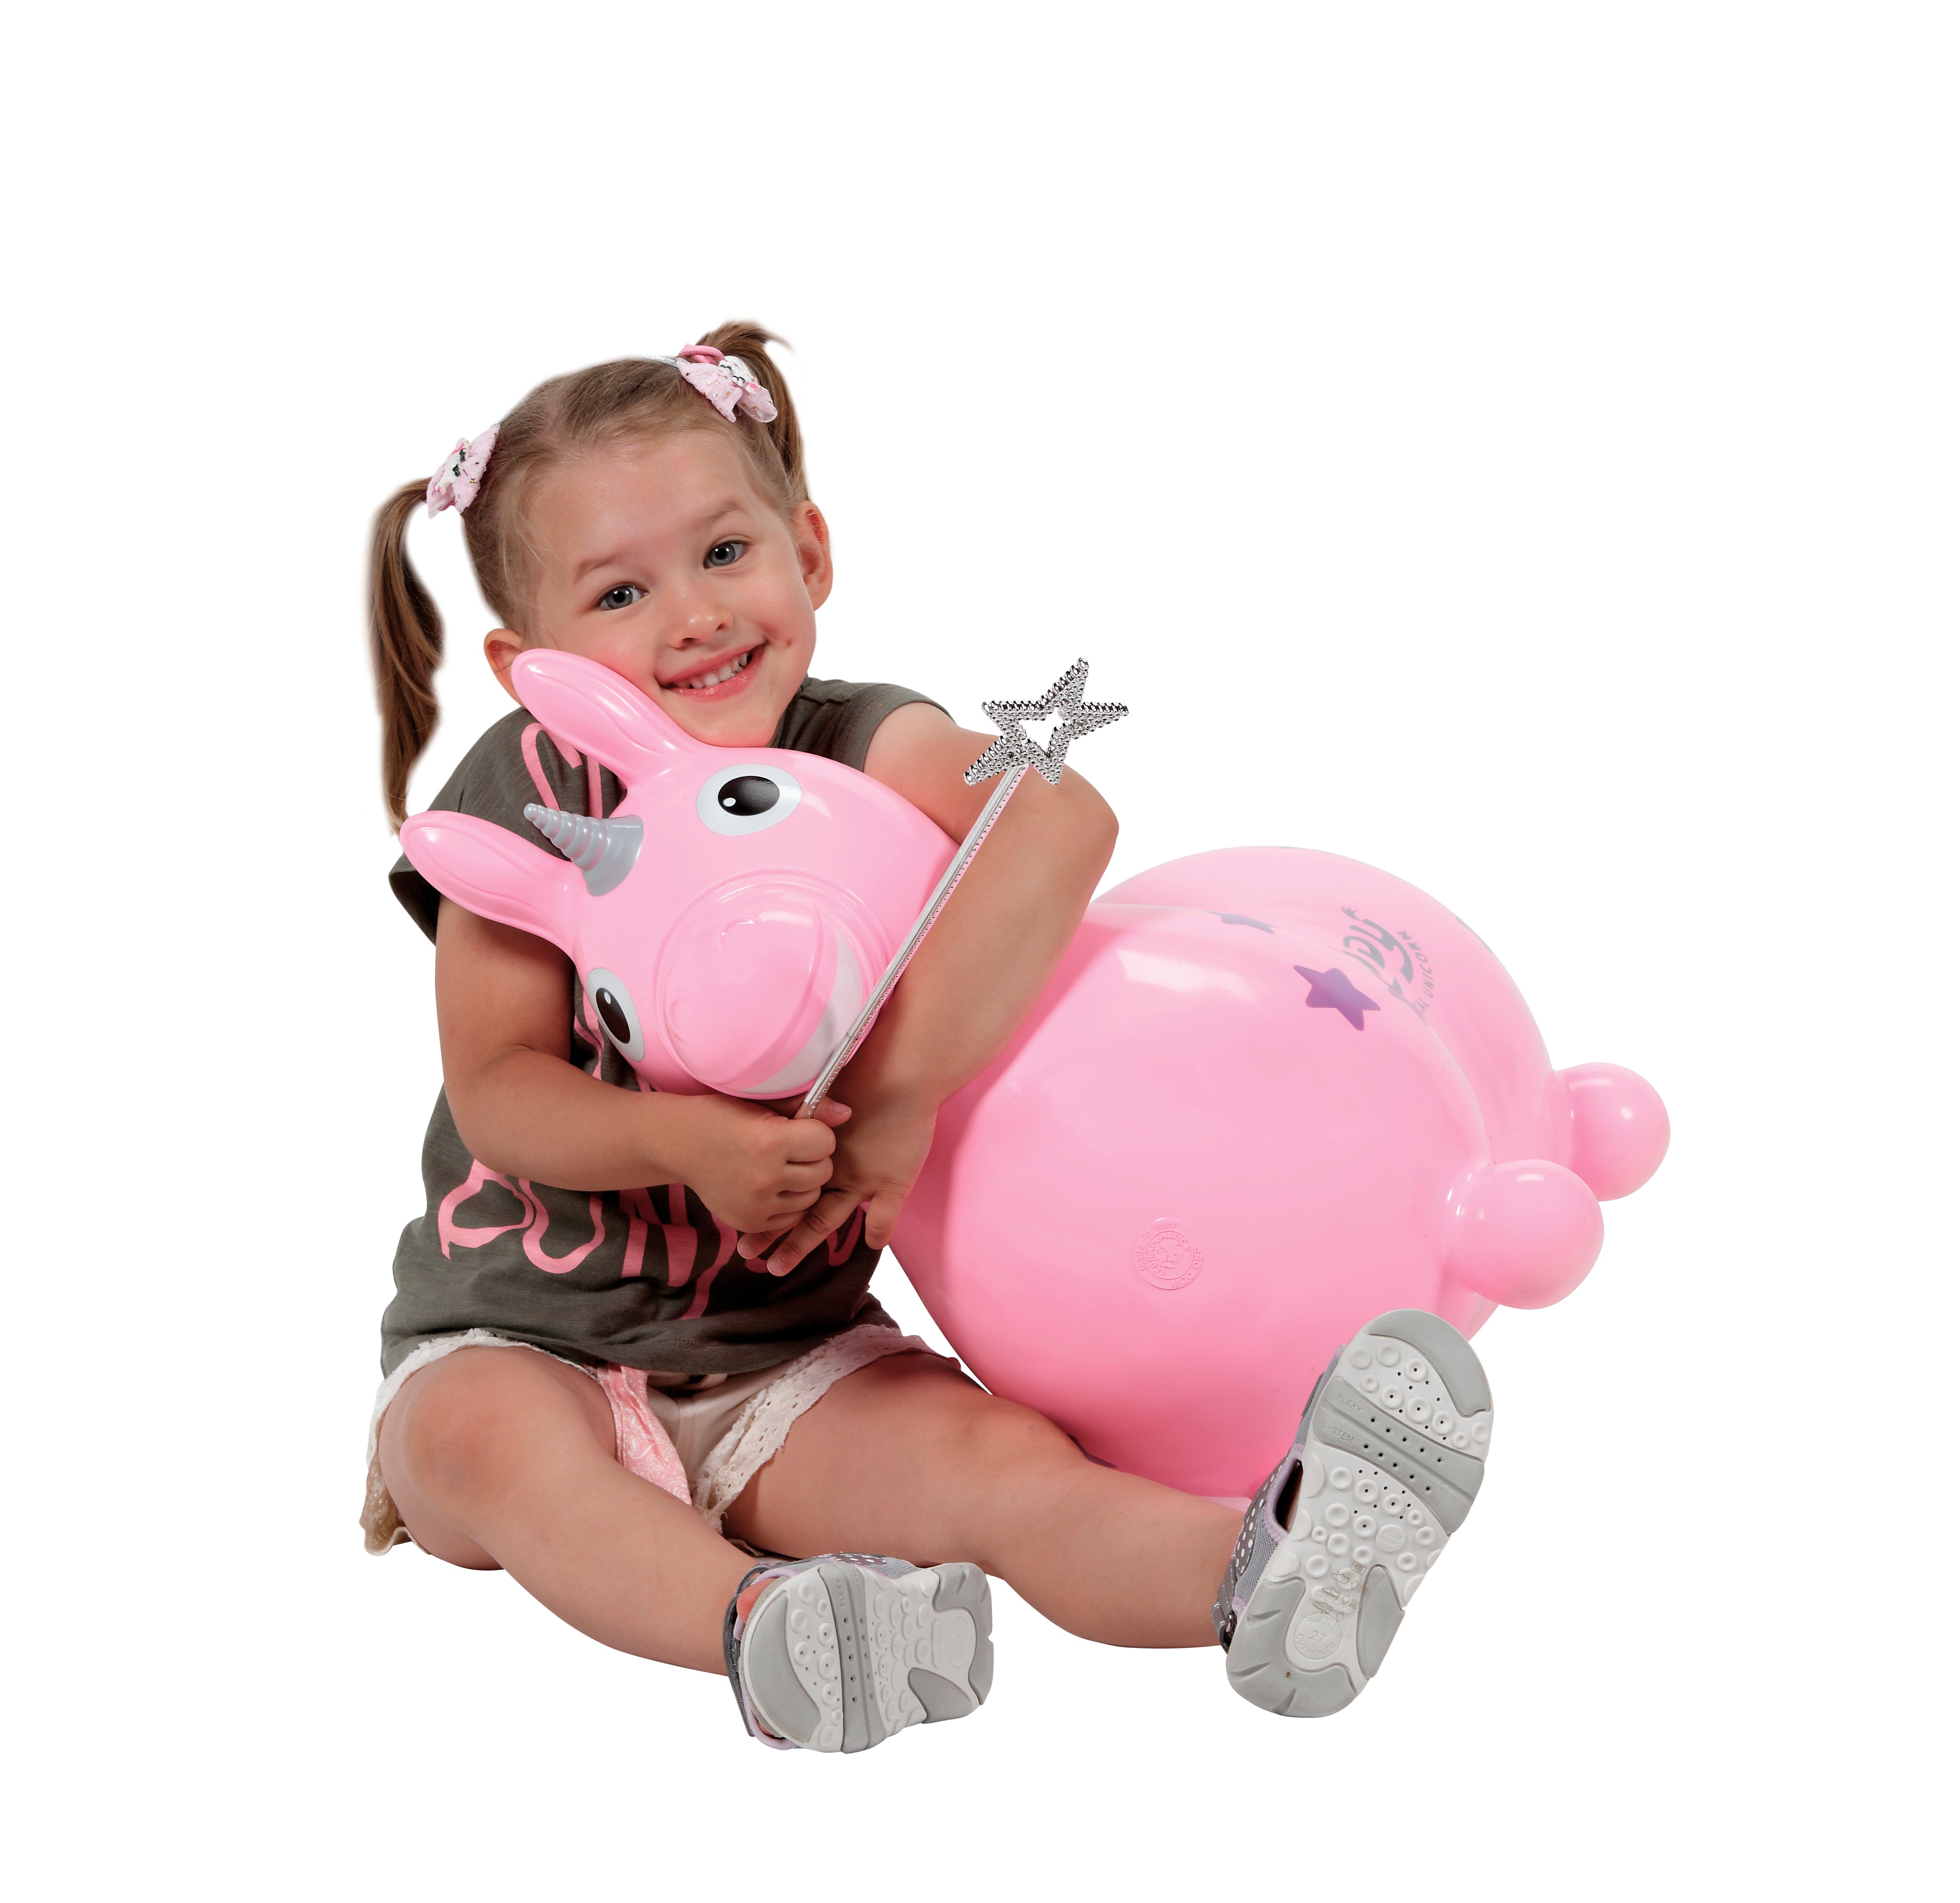 Studio image of a little girl hugging the pink Rody Magical Unicorn while holding a magic wand.